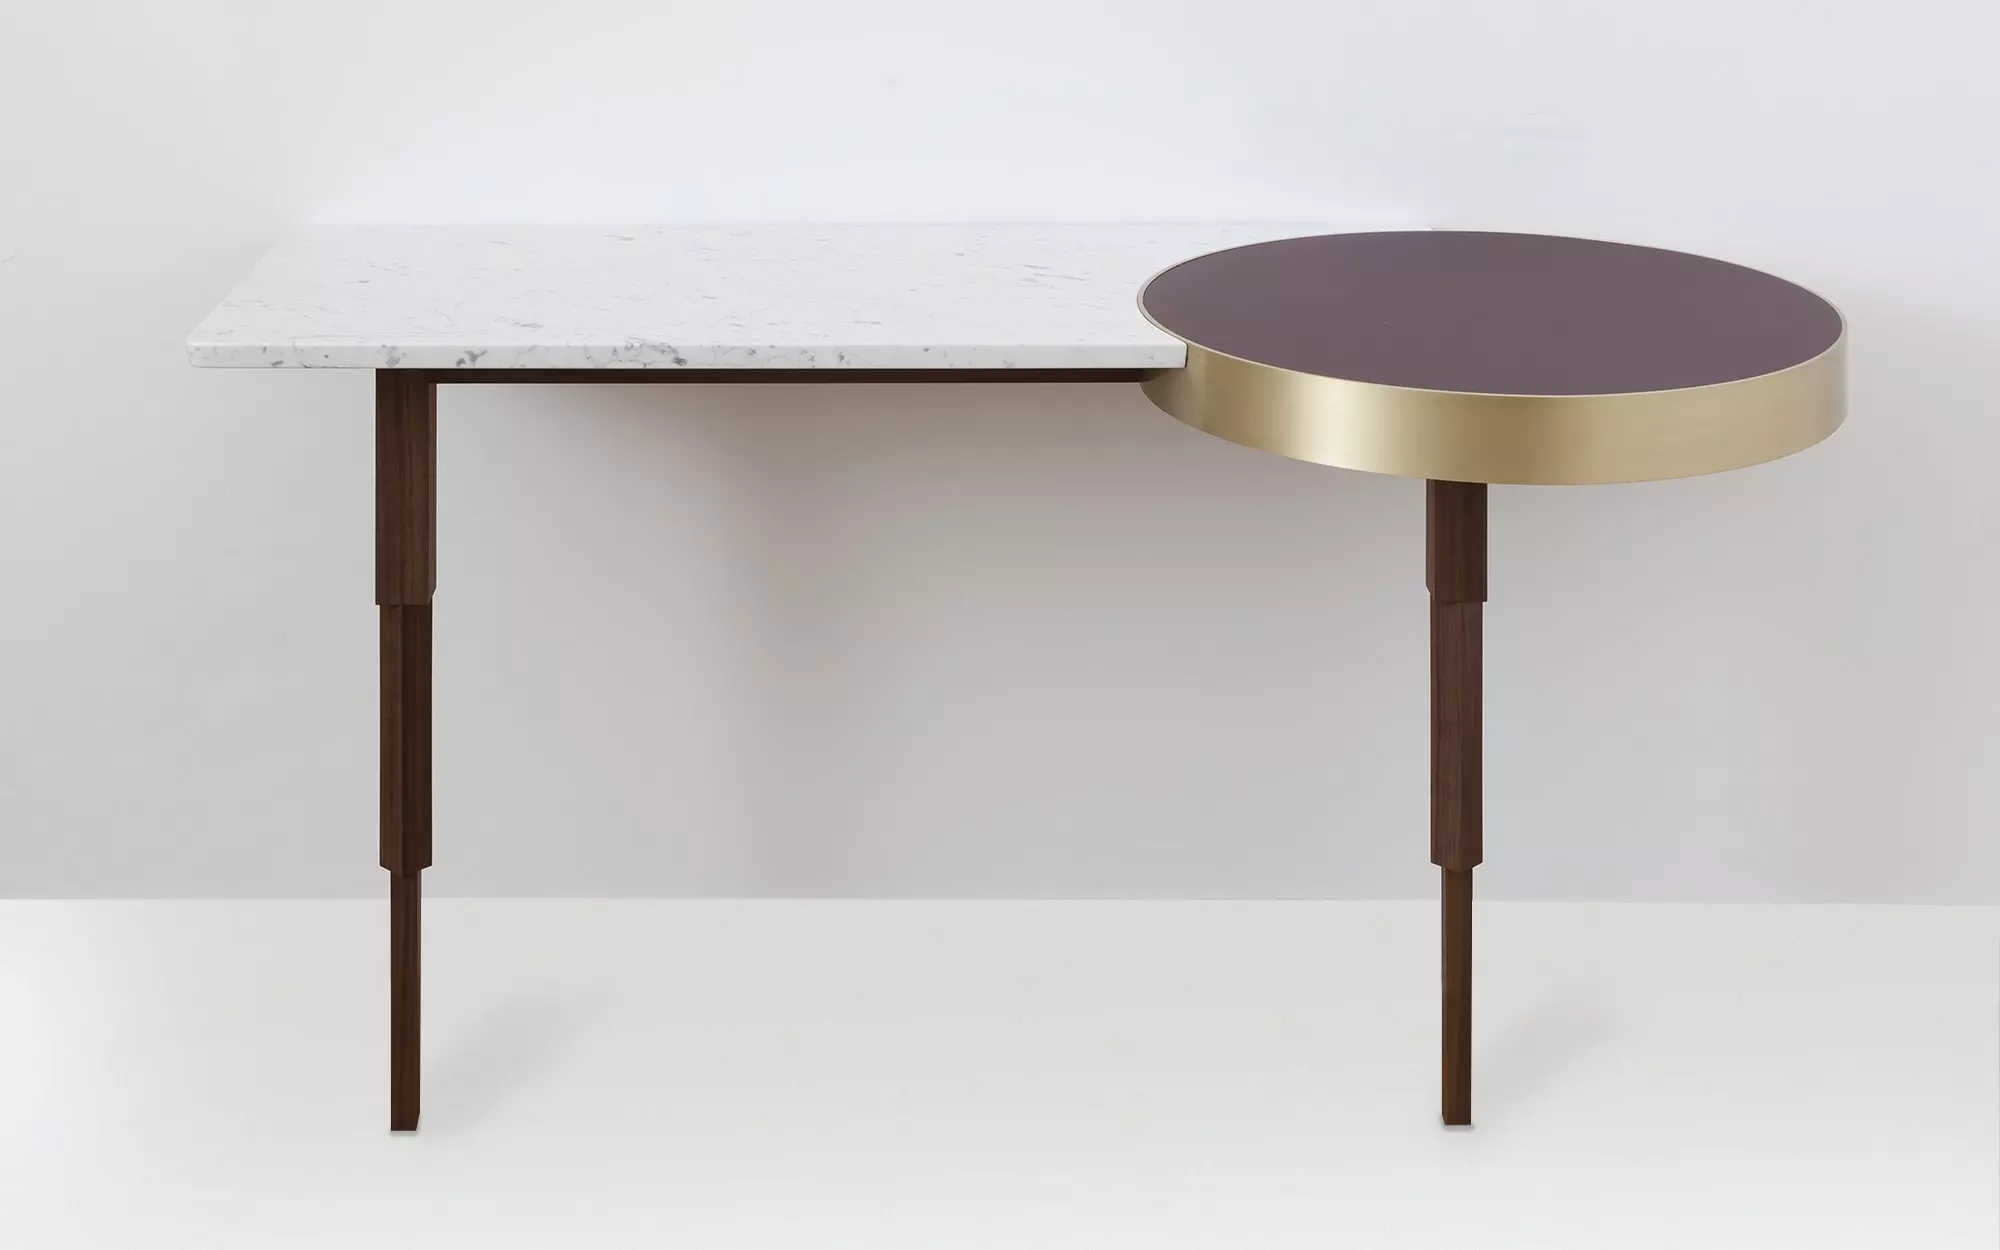 Chance Encounter Console - Doshi Levien - Coffee table - Galerie kreo